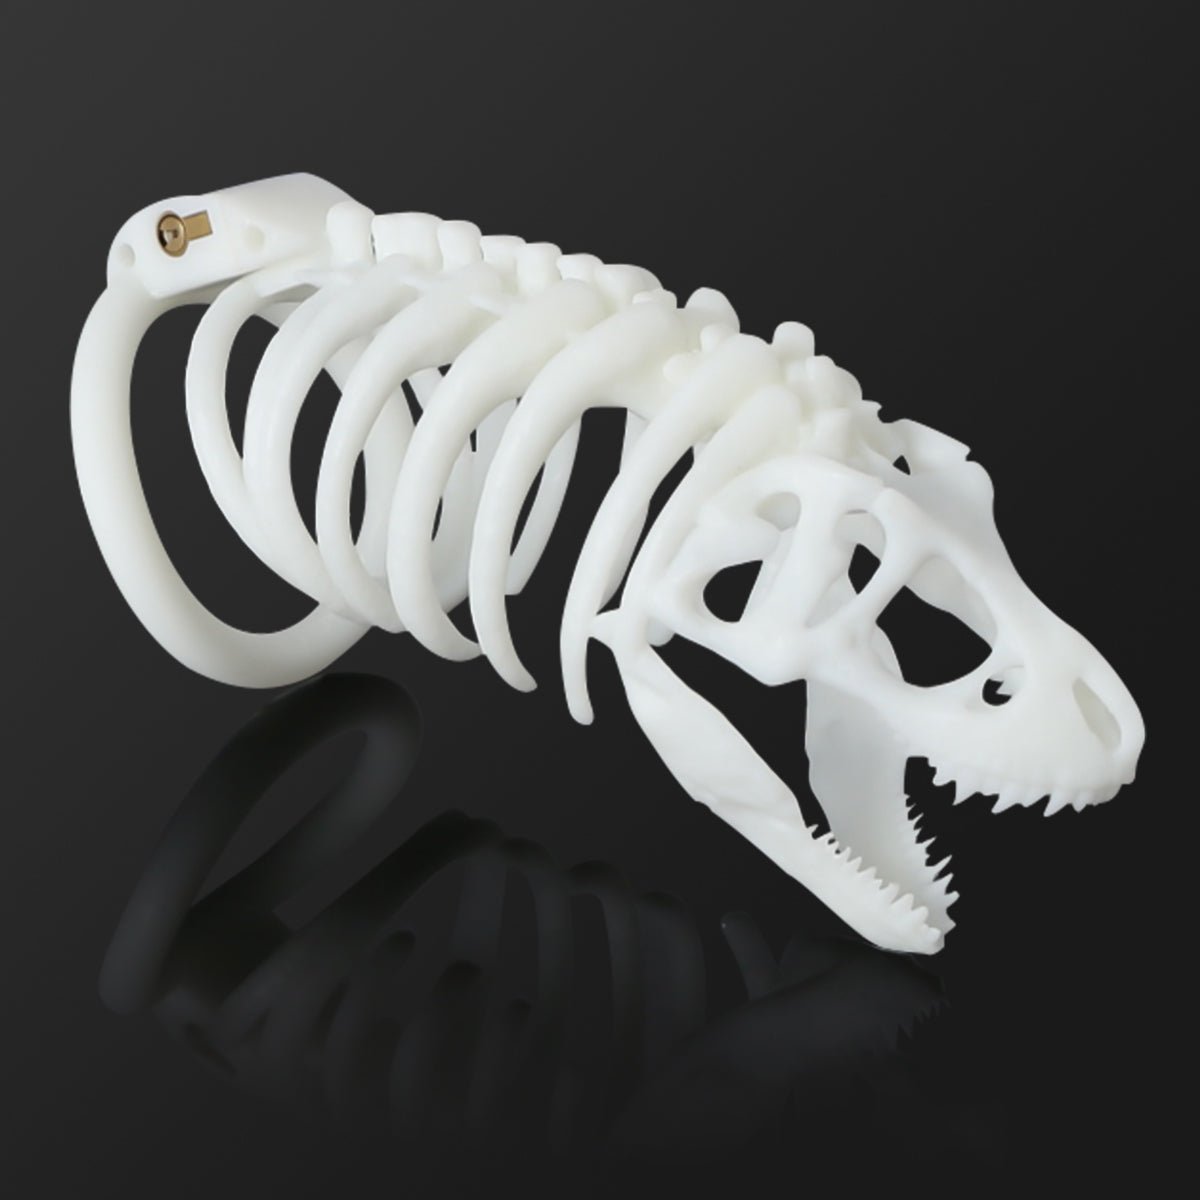 T.Rex Chastity Cage Concept - Oxy-shop